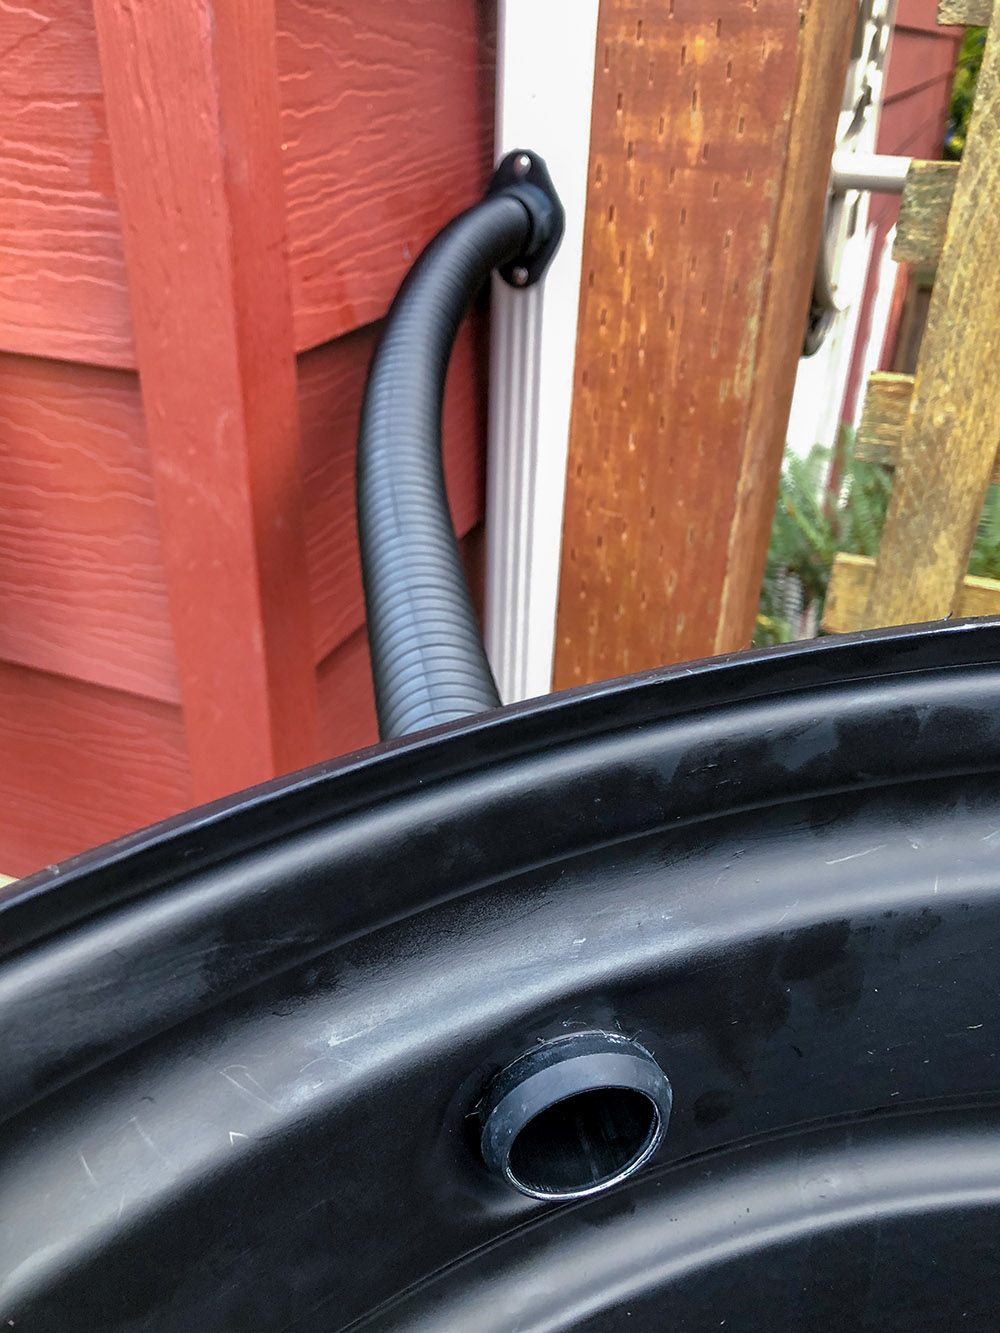 A flexible hose connects the diverter to the rain barrel.